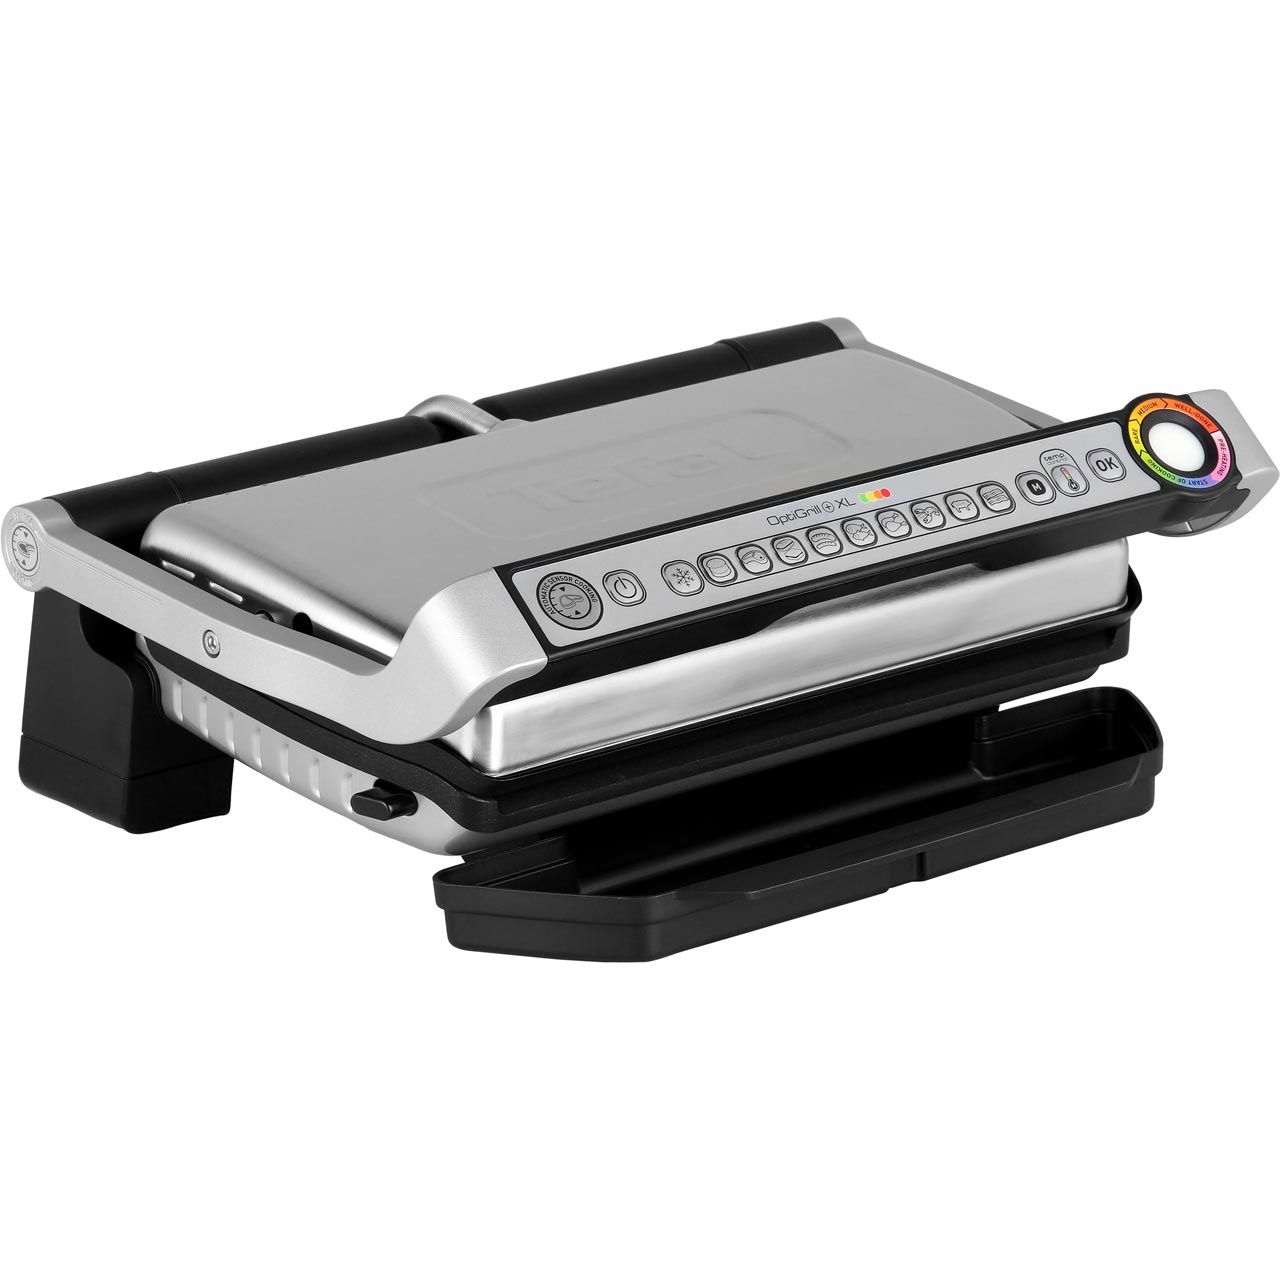 GC722D40_SS | Tefal health grill removable plates | ao.com